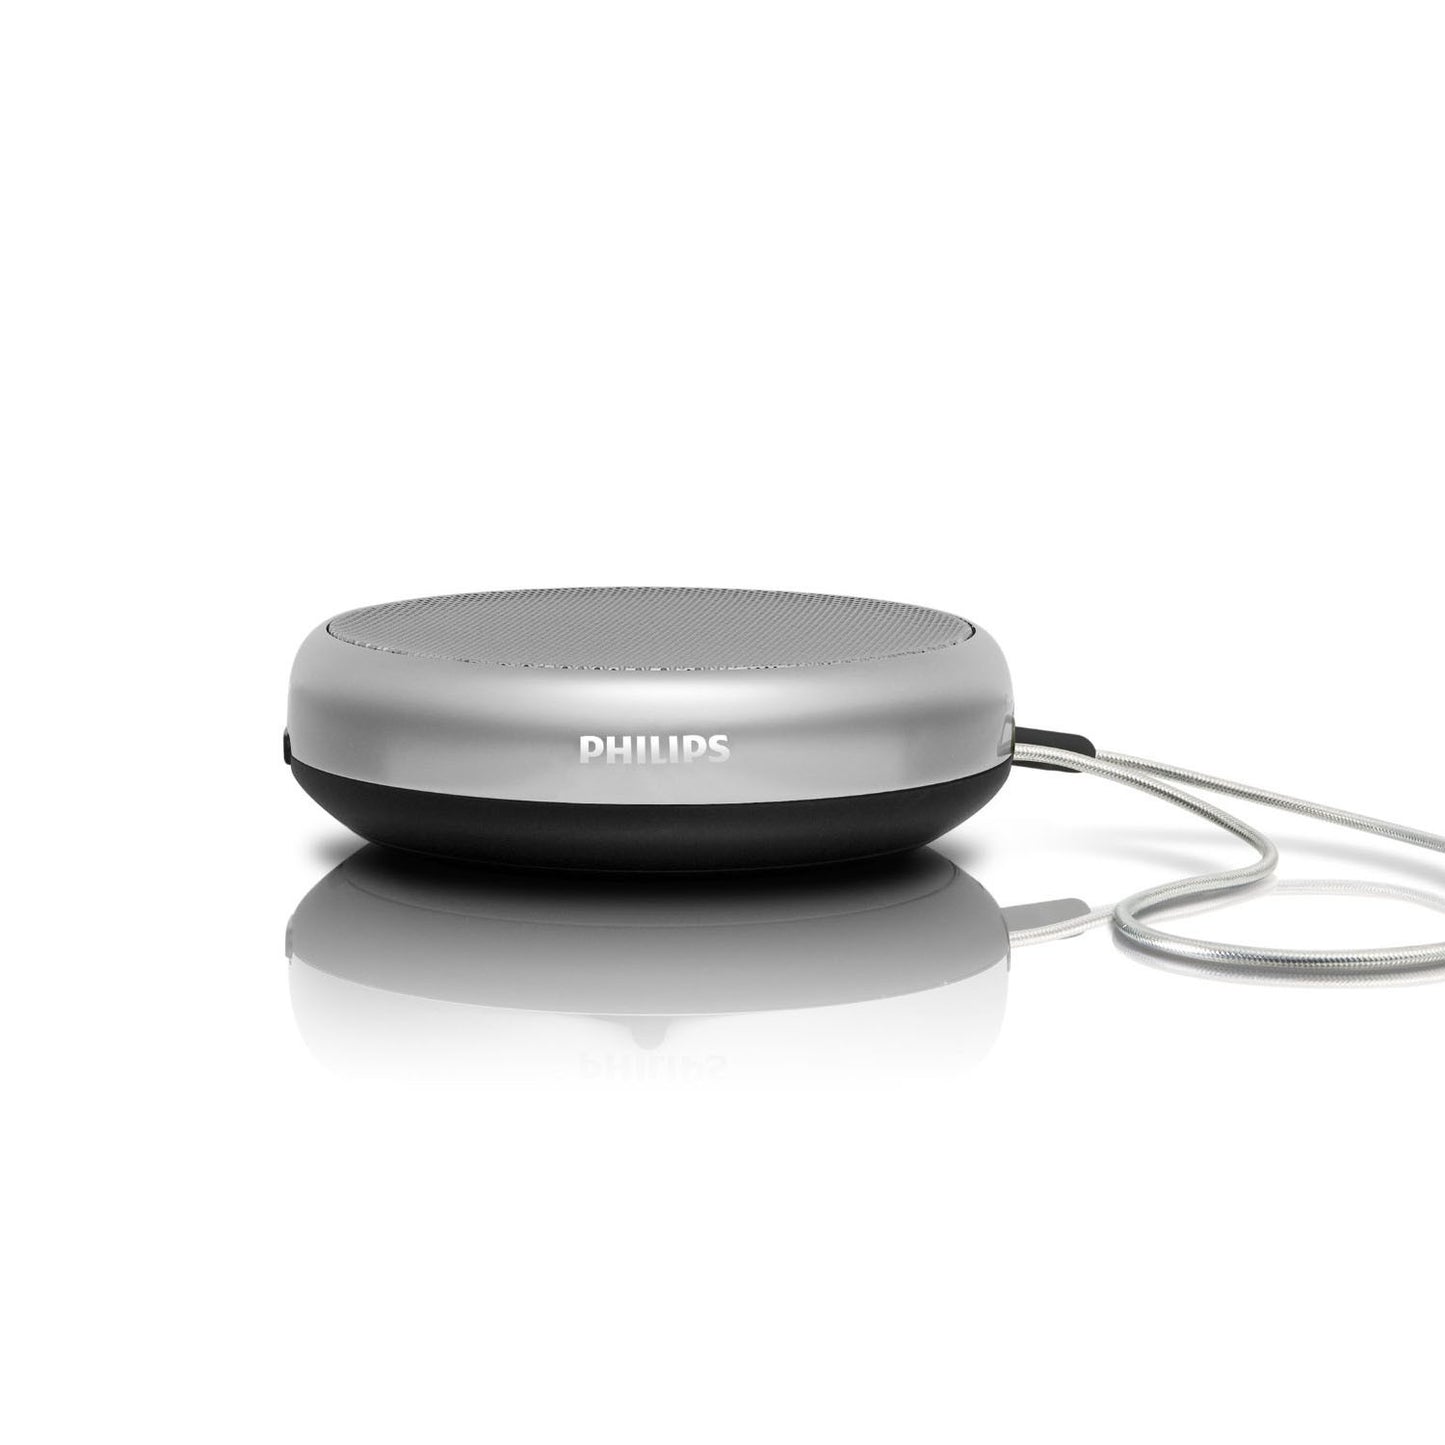 Philips SBA1700/37 MP3 Portable Speaker SBA1700 Universal (Grey) (Discontinued by Manufacturer)